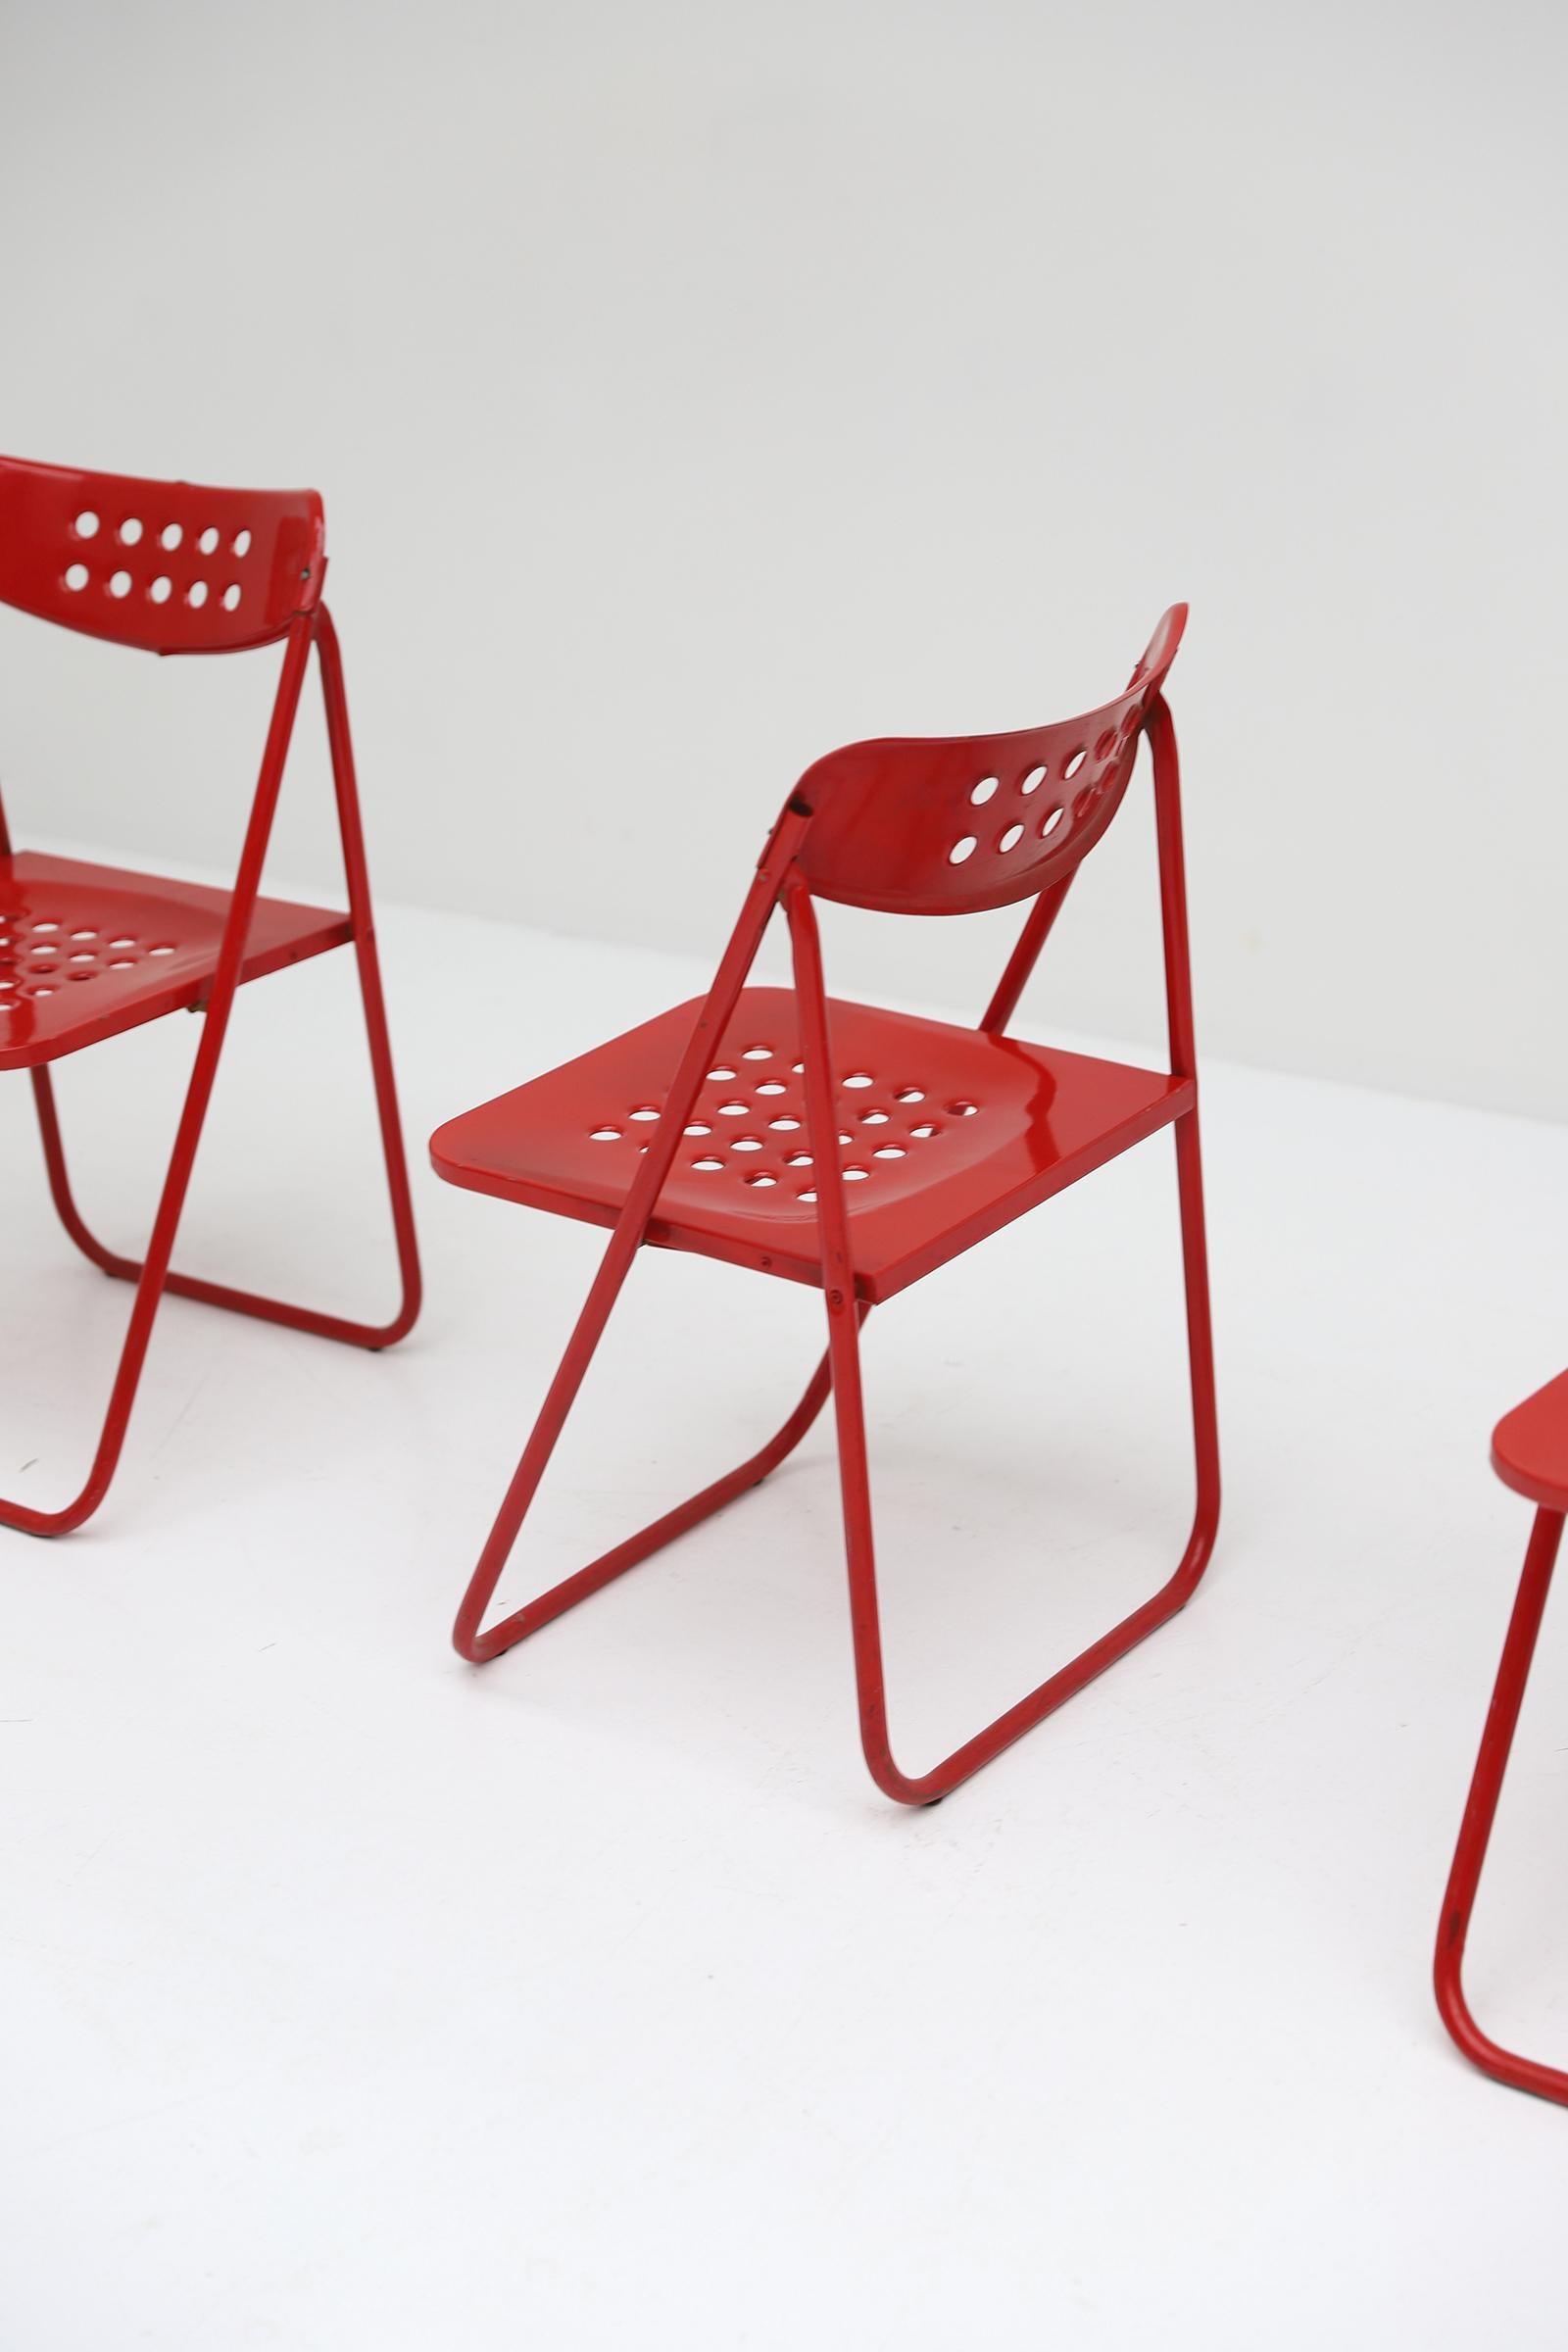 Set of Four Modern Red Lacquered Metal Folding Chairs 1980s For Sale 2